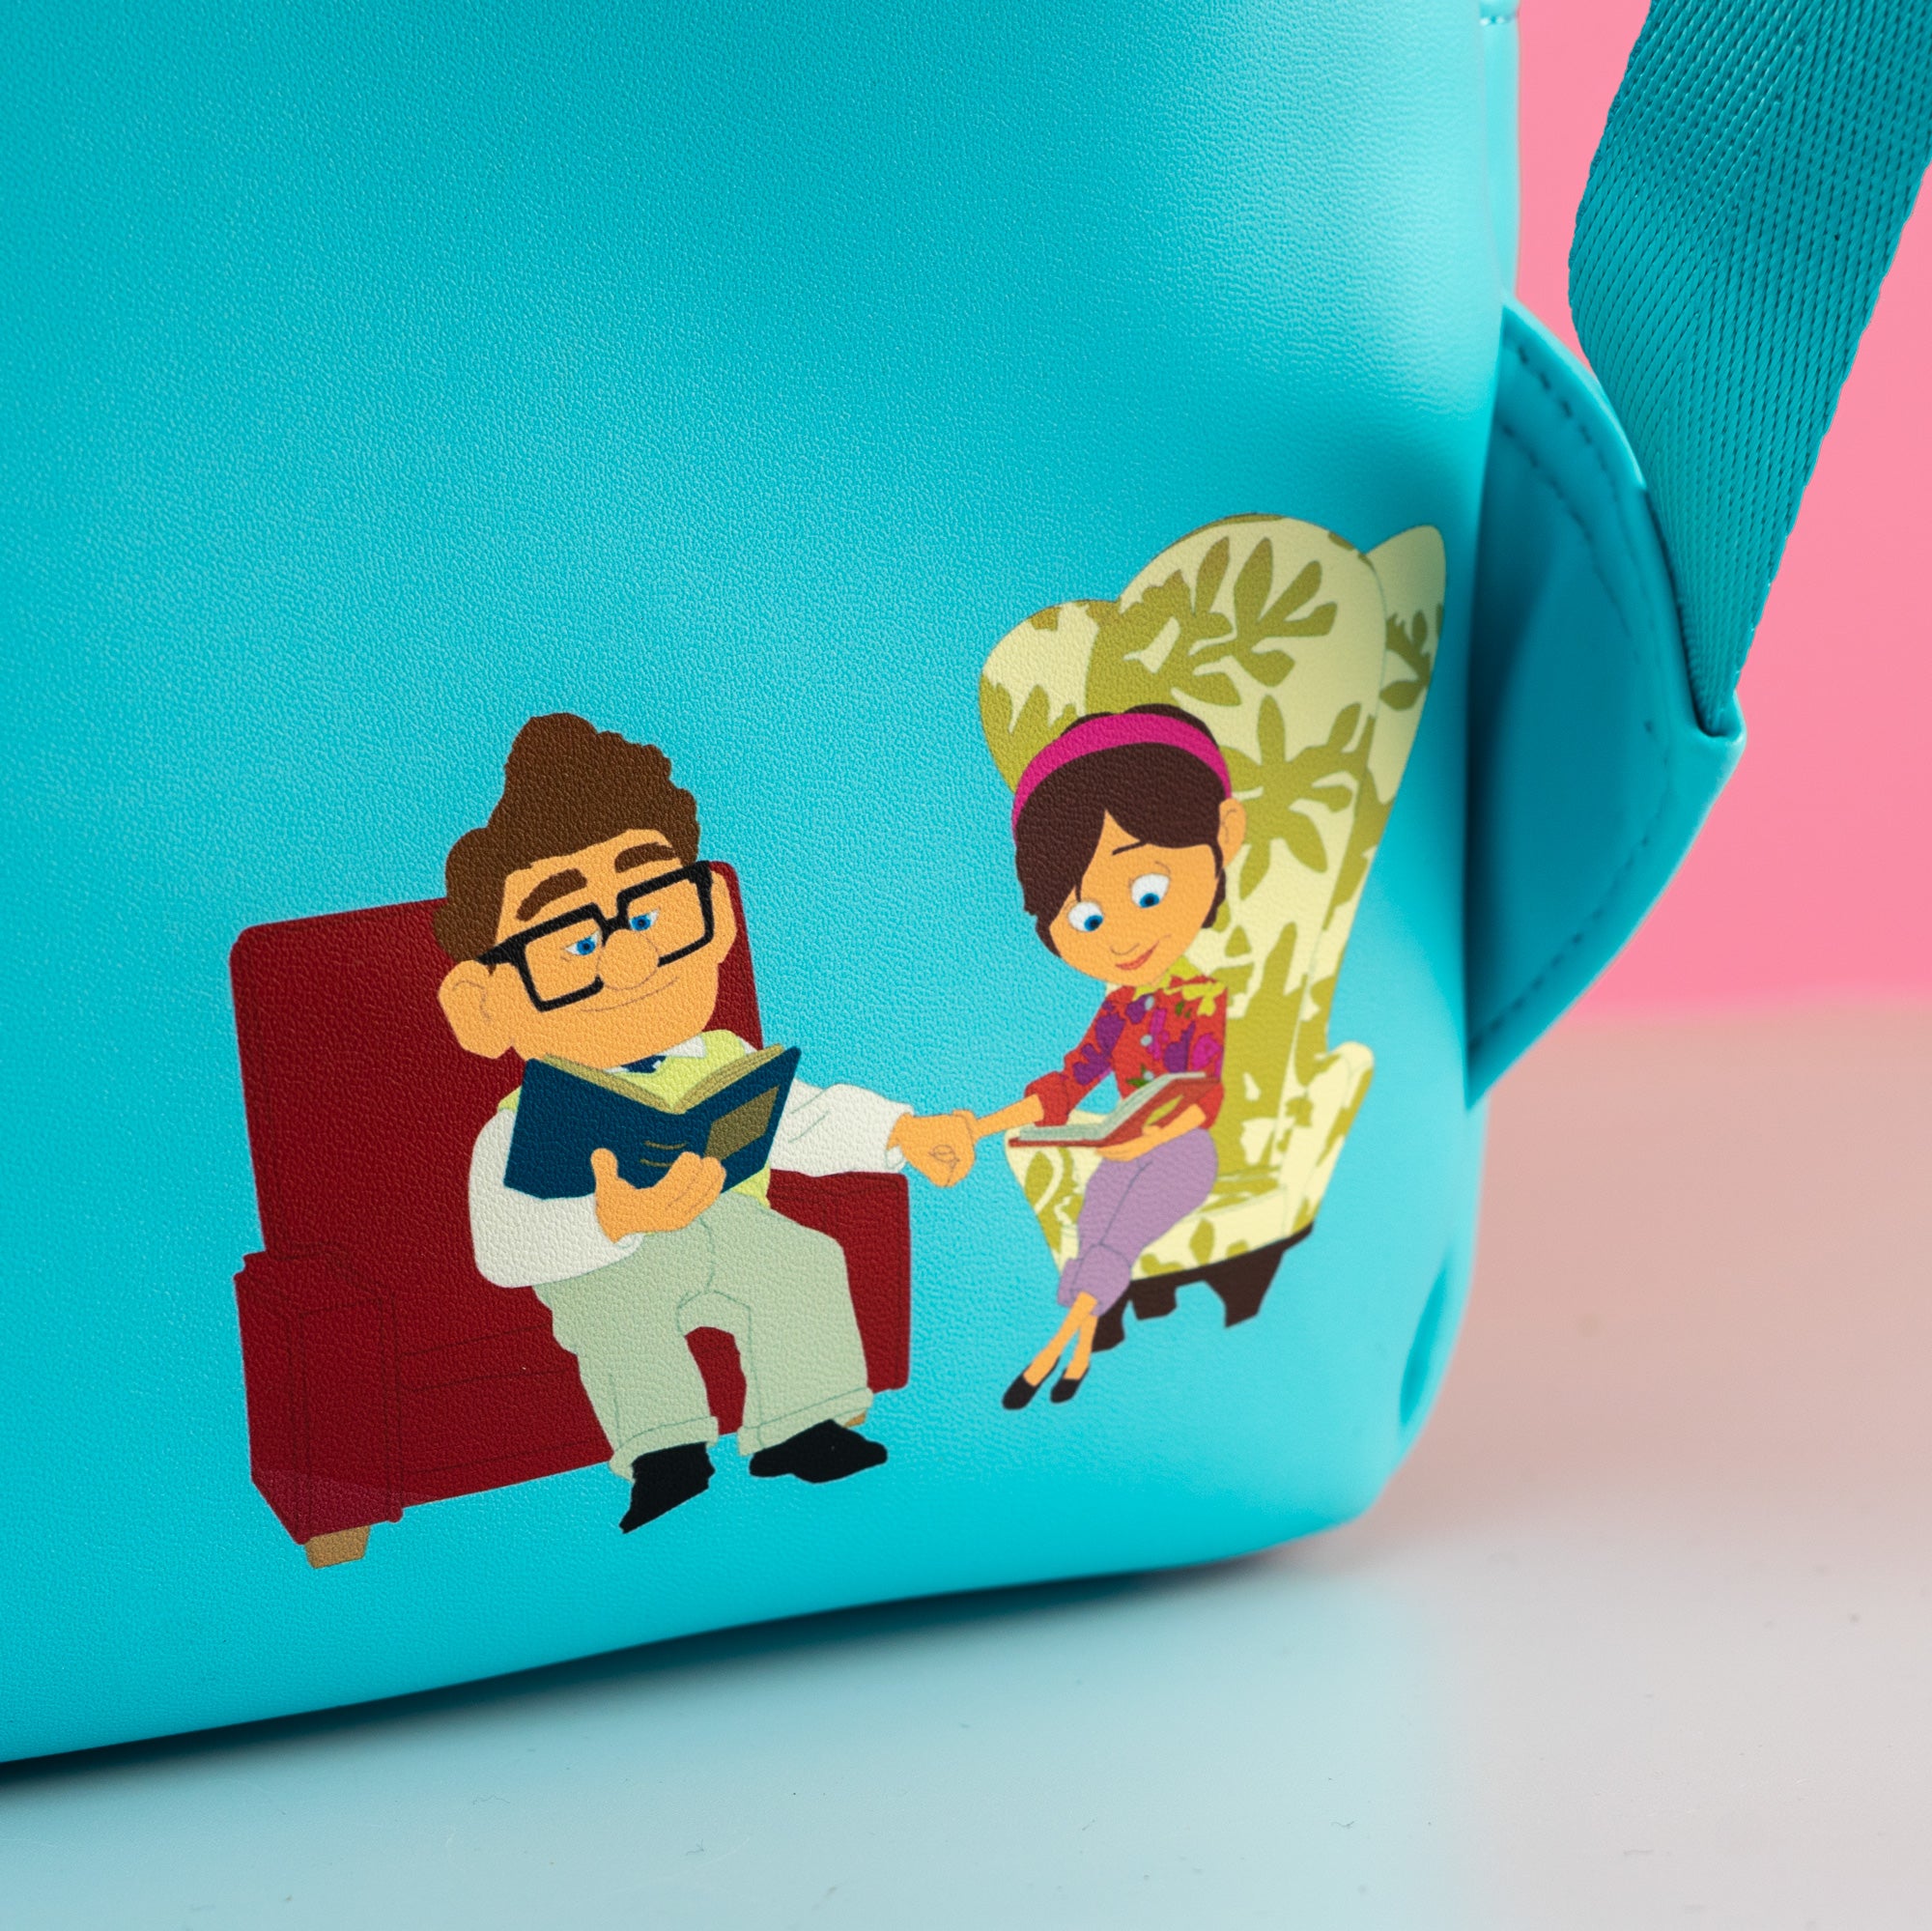 Loungefly x Disney Pixar Up Carl and Ellie Balloon Moments Mini Backpack